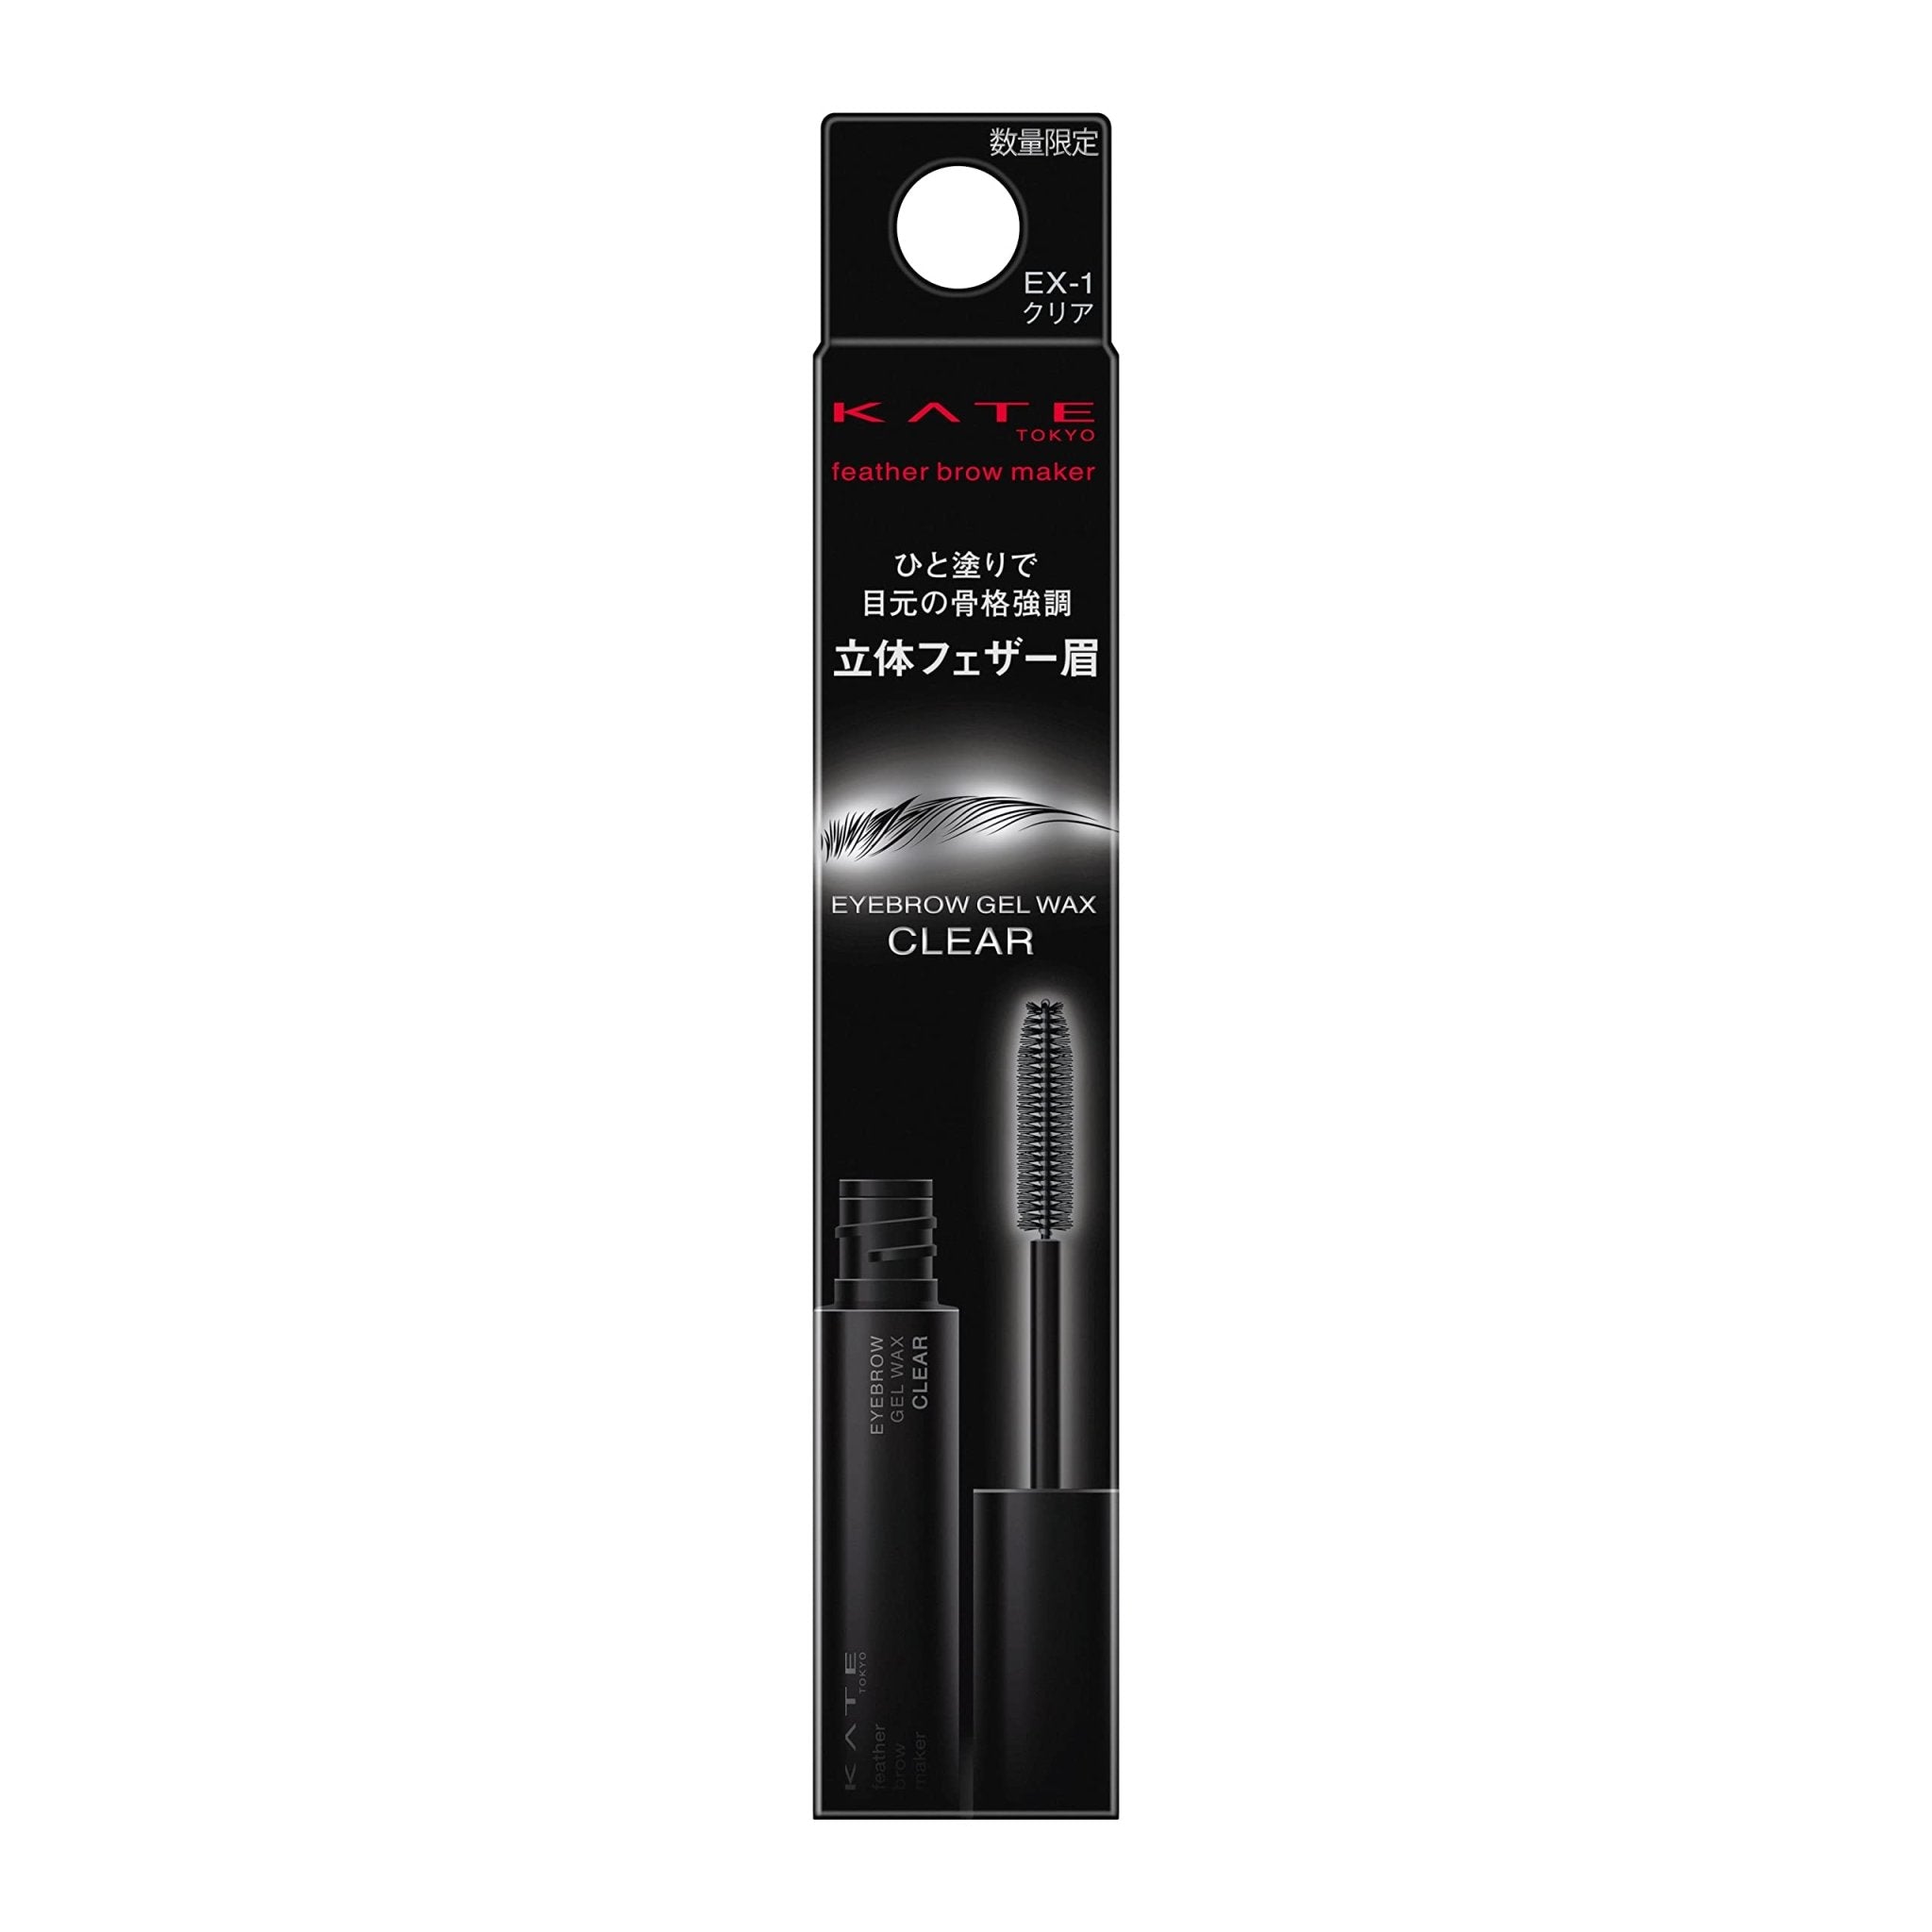 Kate Feather Brow Maker Ex - 1 6G - Premium Quality Makeup Product